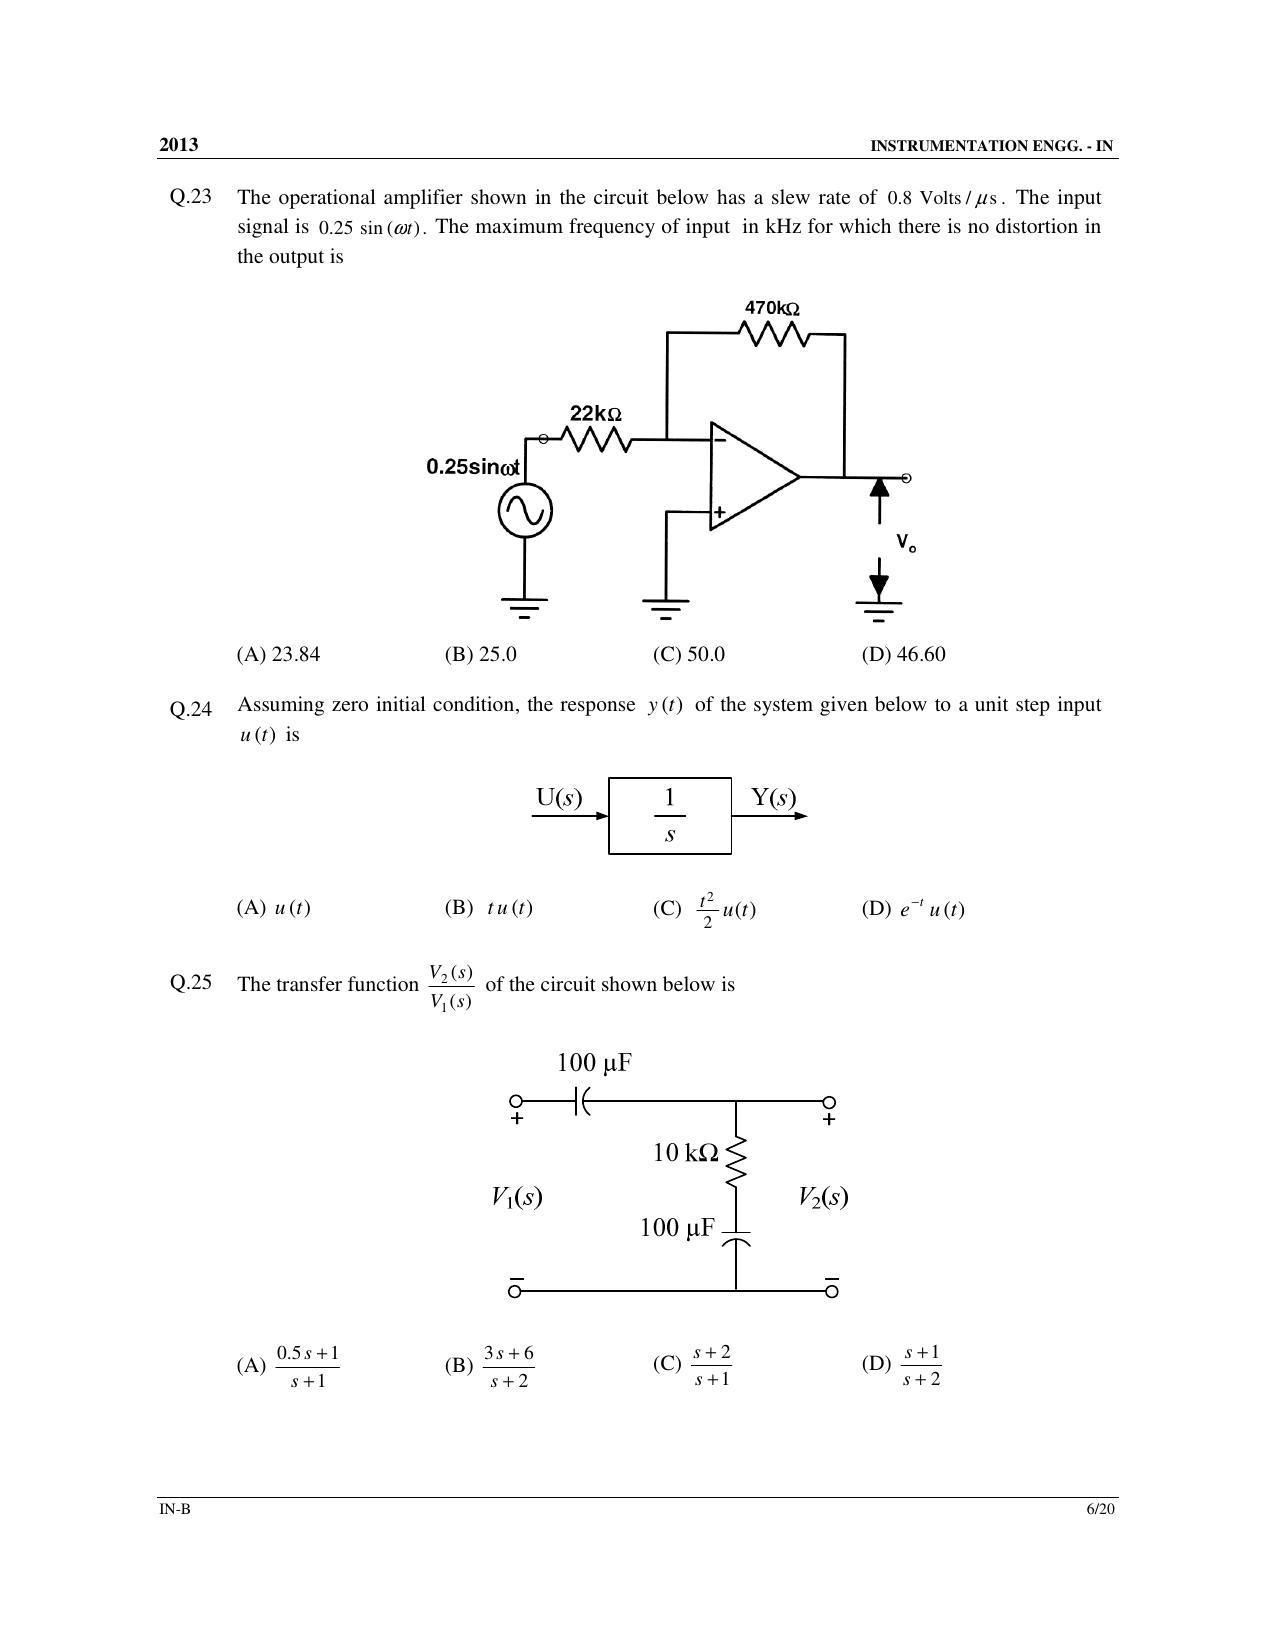 GATE 2013 Instrumentation Engineering (IN) Question Paper with Answer Key - Page 24